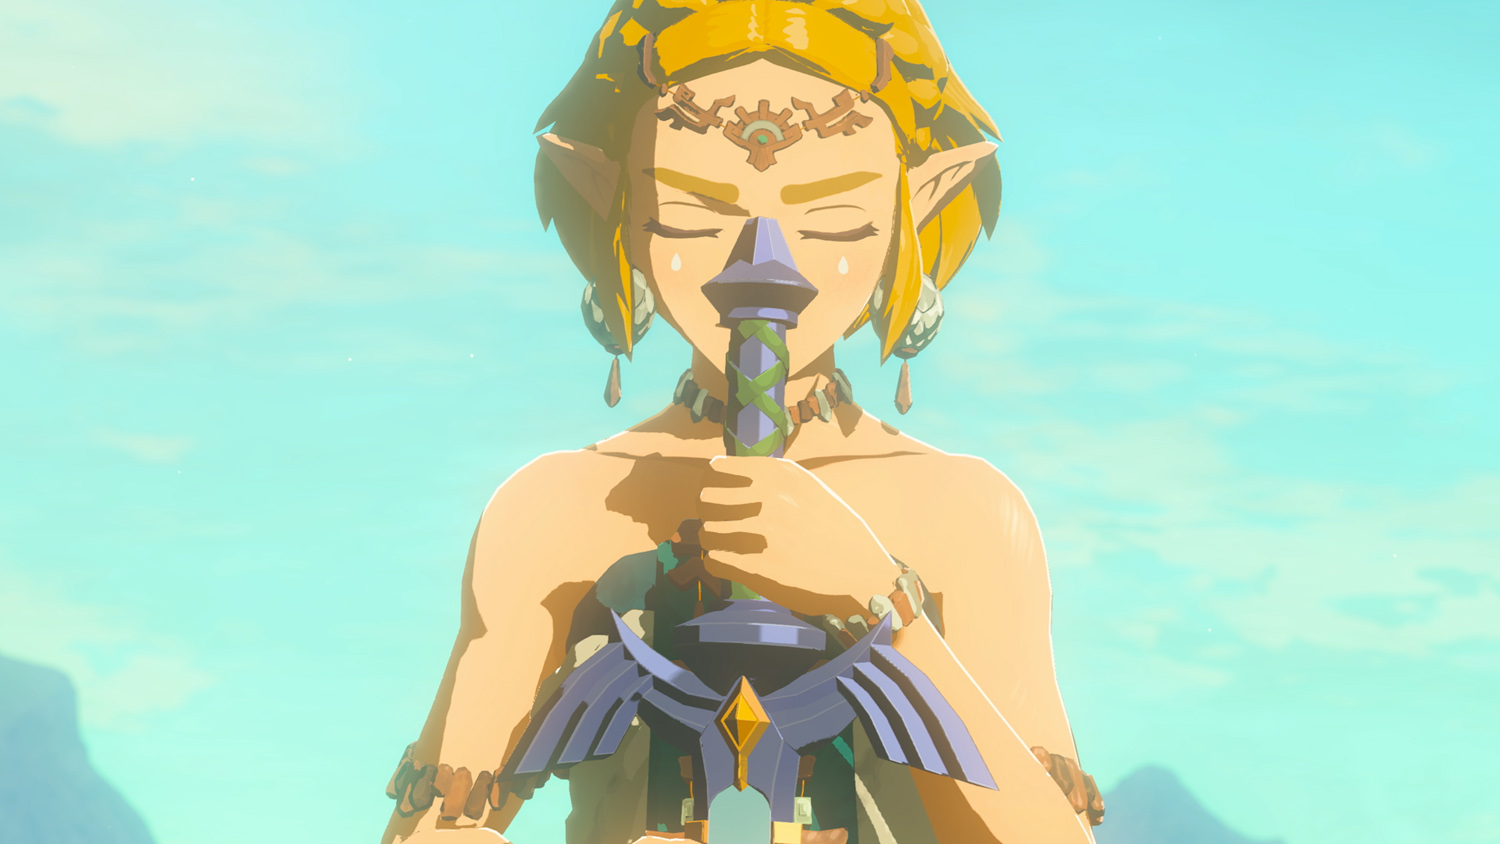 Is The Legend Of Zelda Movie Happening? Here Is What We Know So Far